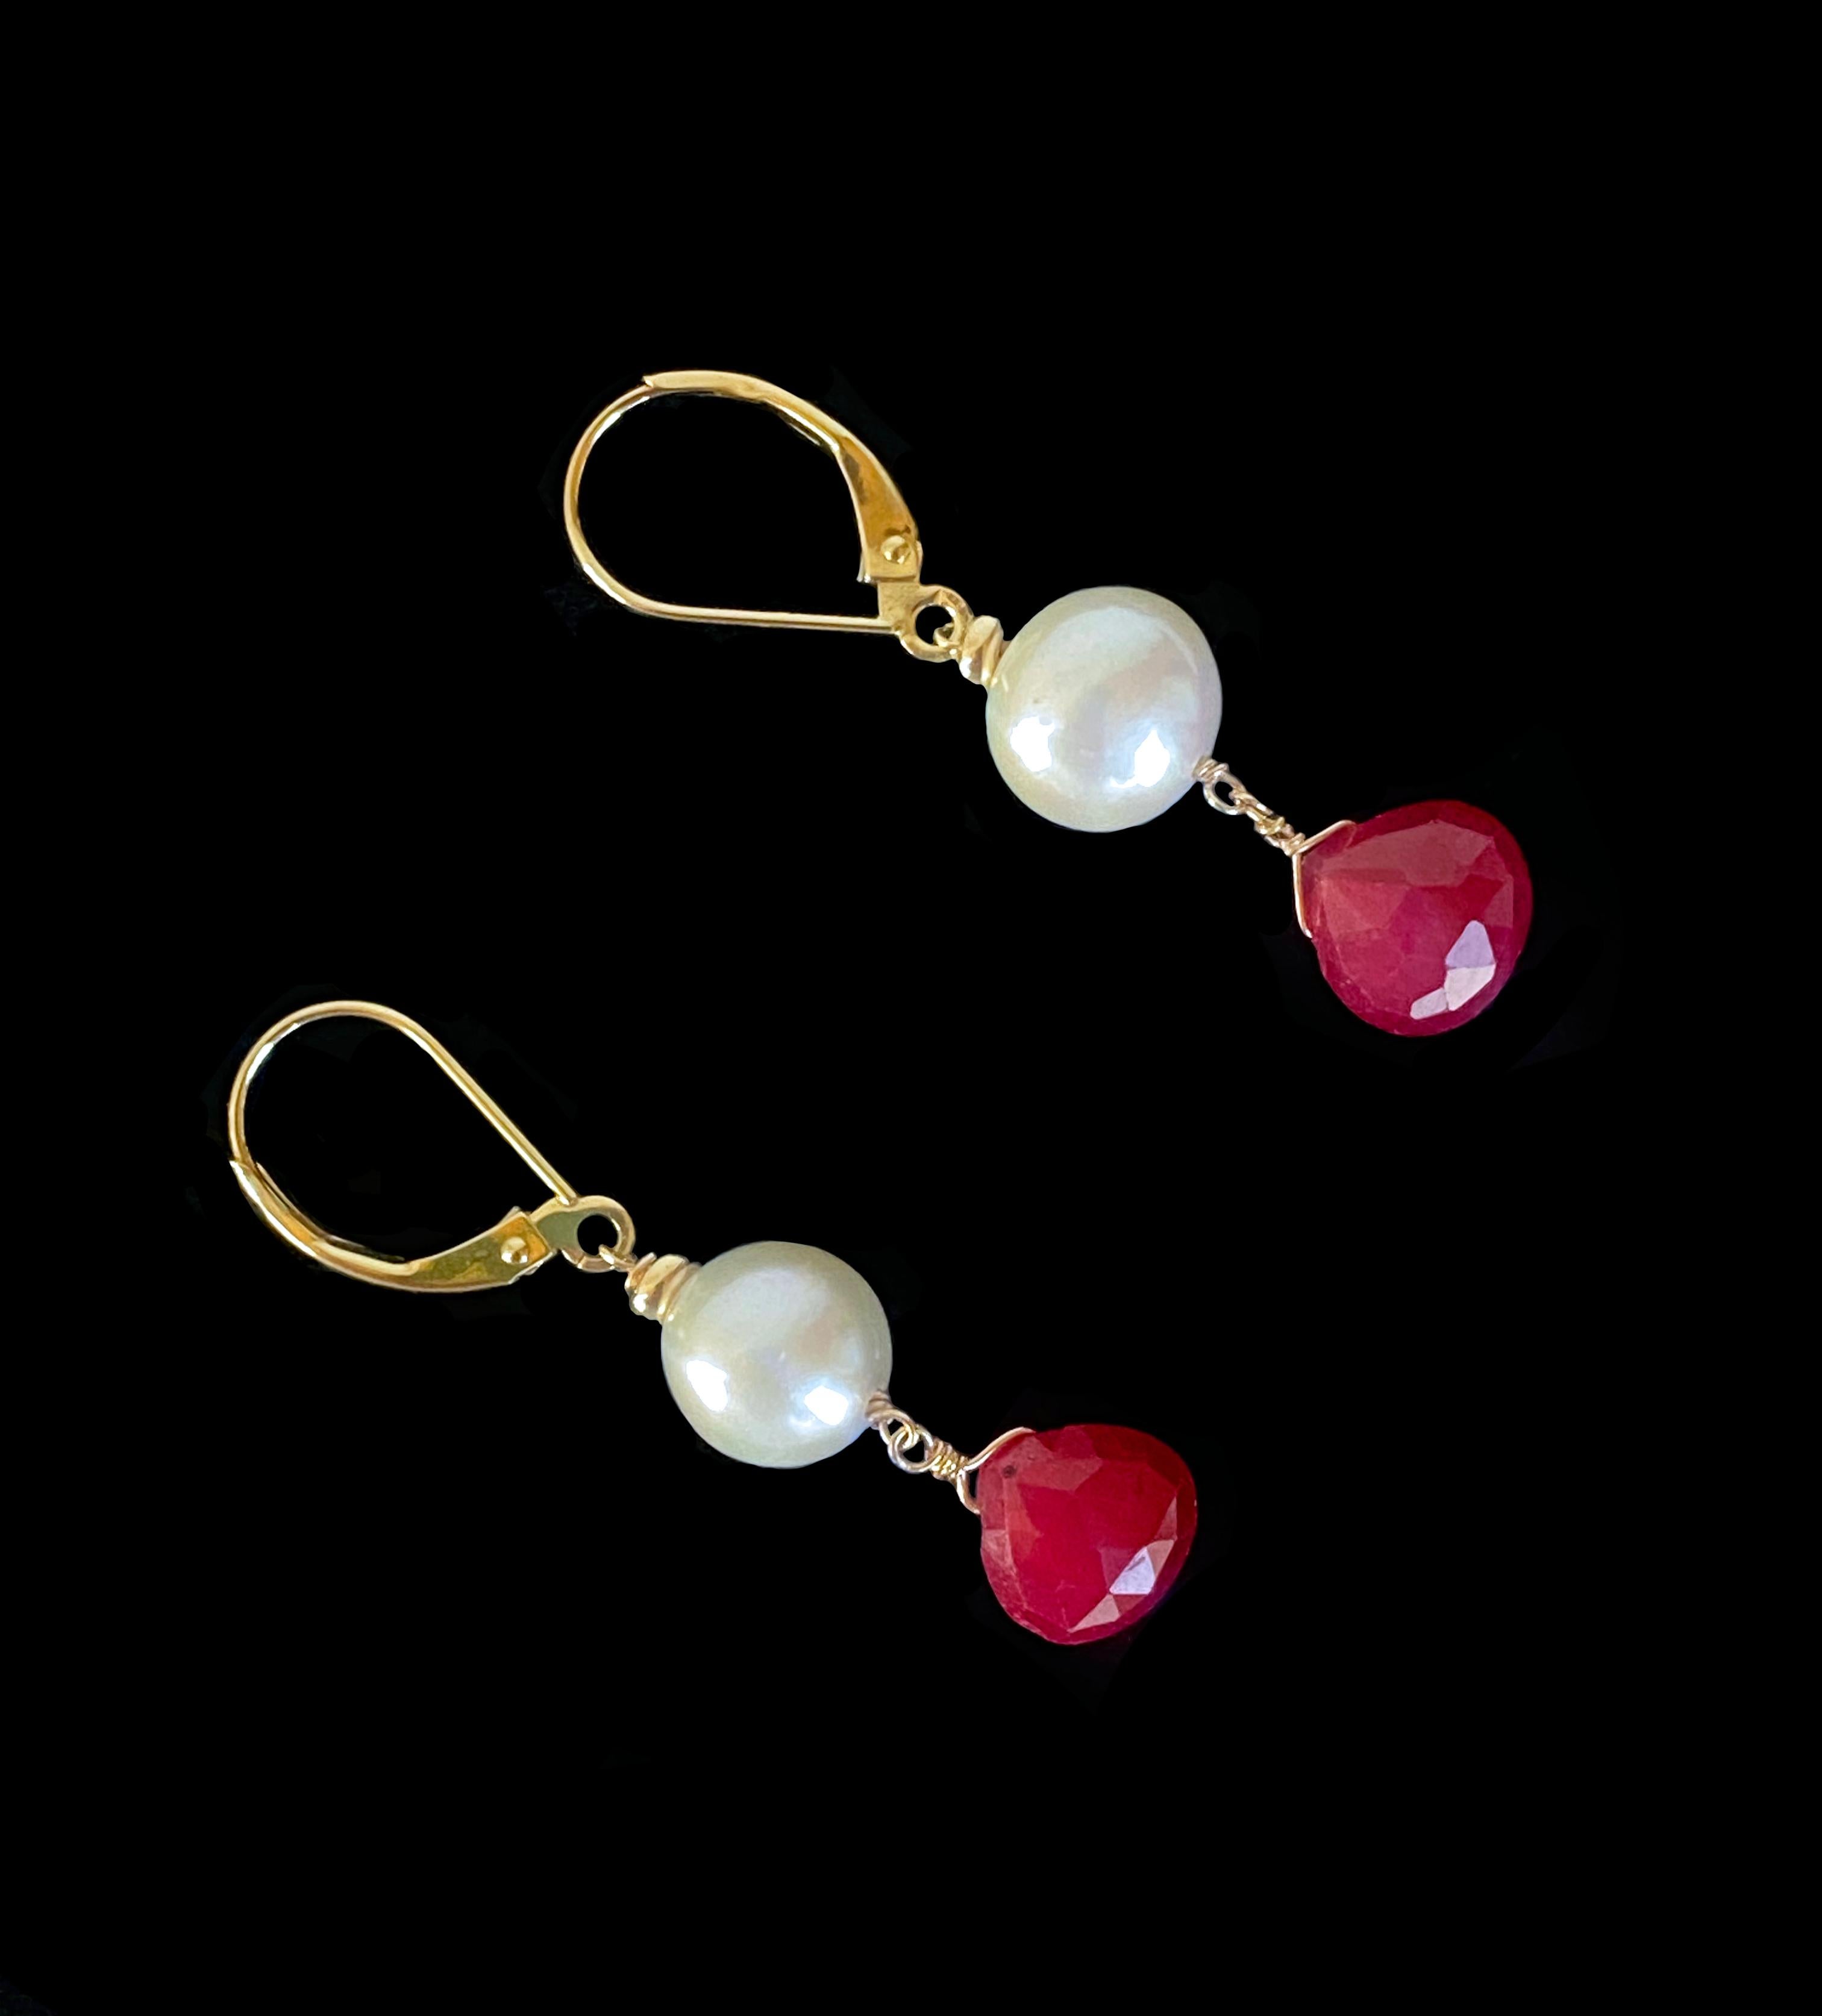 Simple yet bold pair of Earrings by Marina J. Measuring 1.5 inches long, these Earrings feature all solid 14k Yellow gold Lever Backs and wiring, from which a round high luster Pearl and faceted Teardrop Ruby hang. The Rubies display a radiant